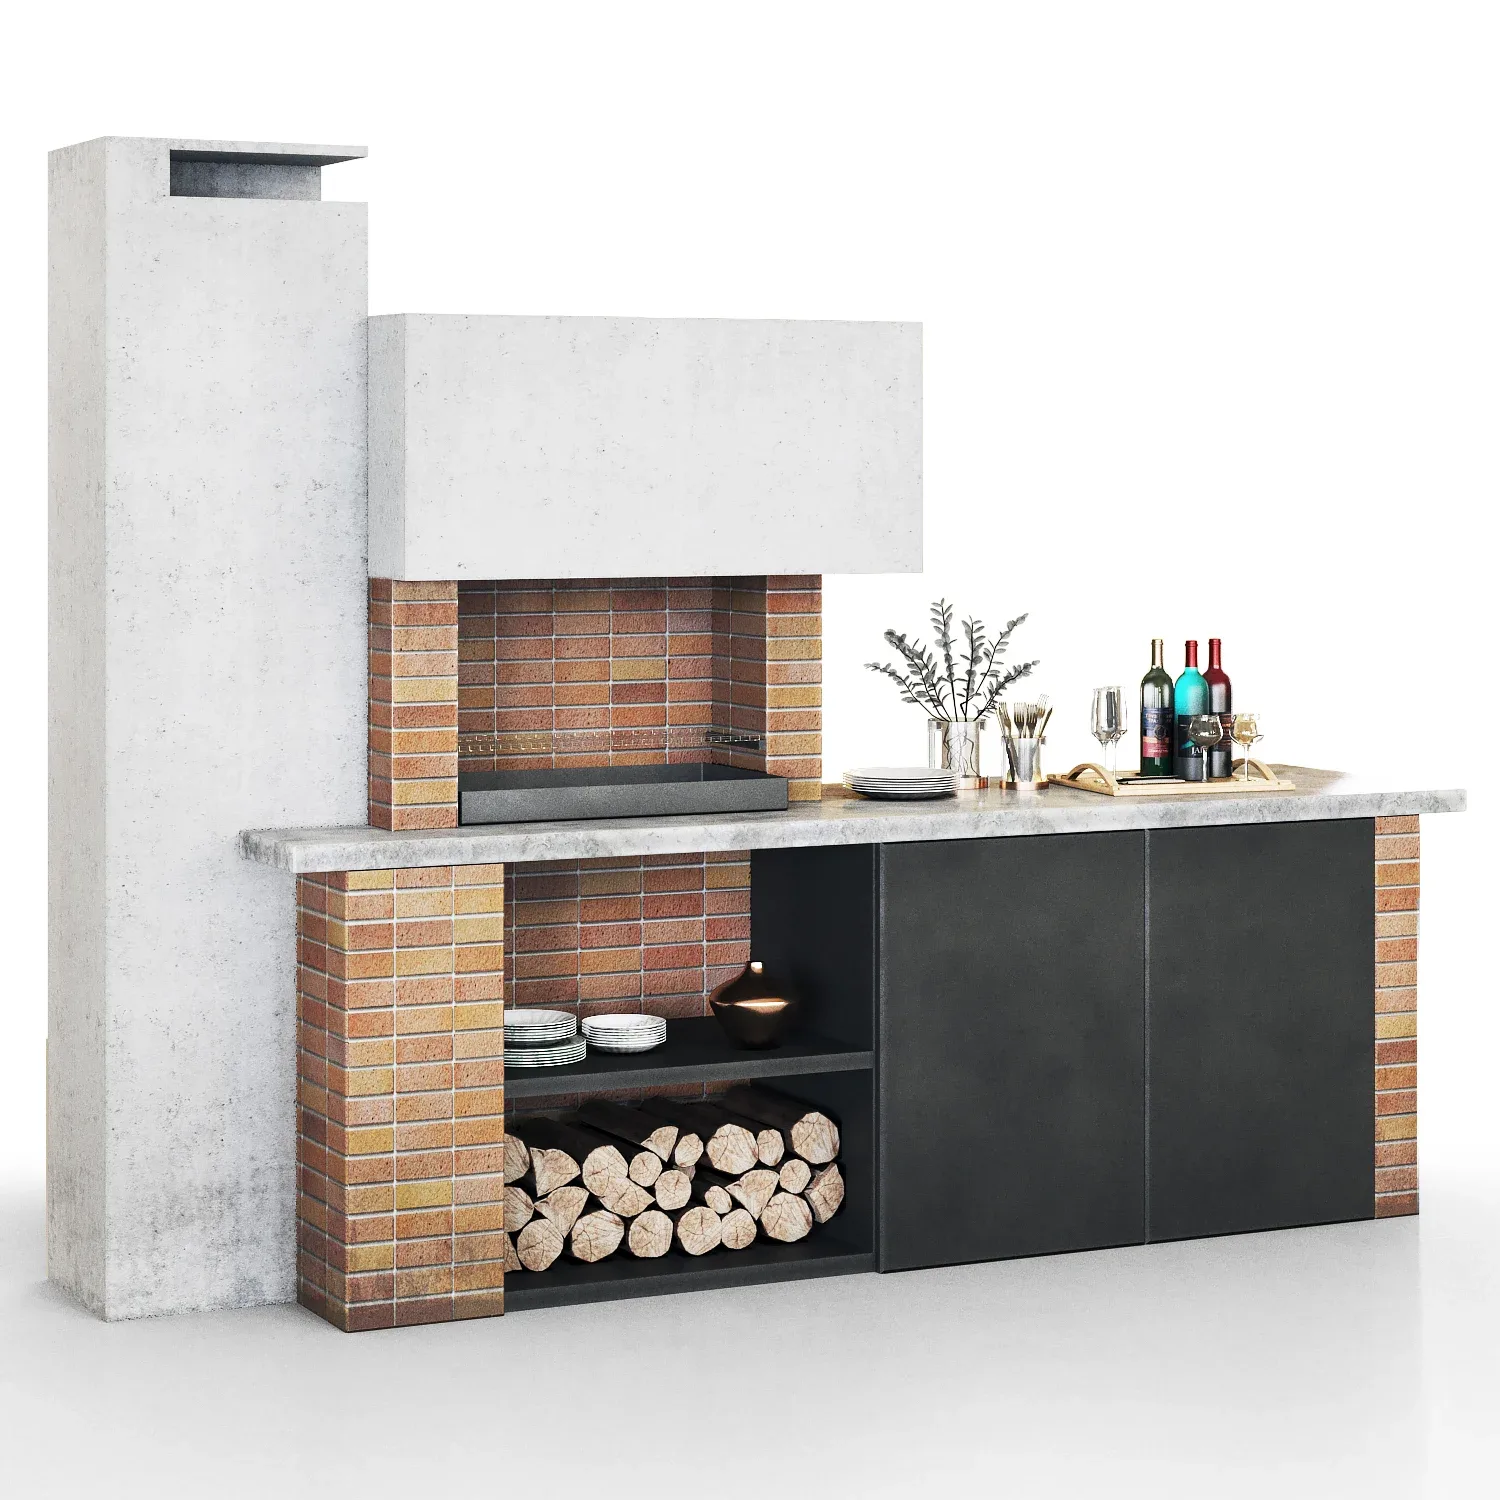 Barbecue grill fireplace